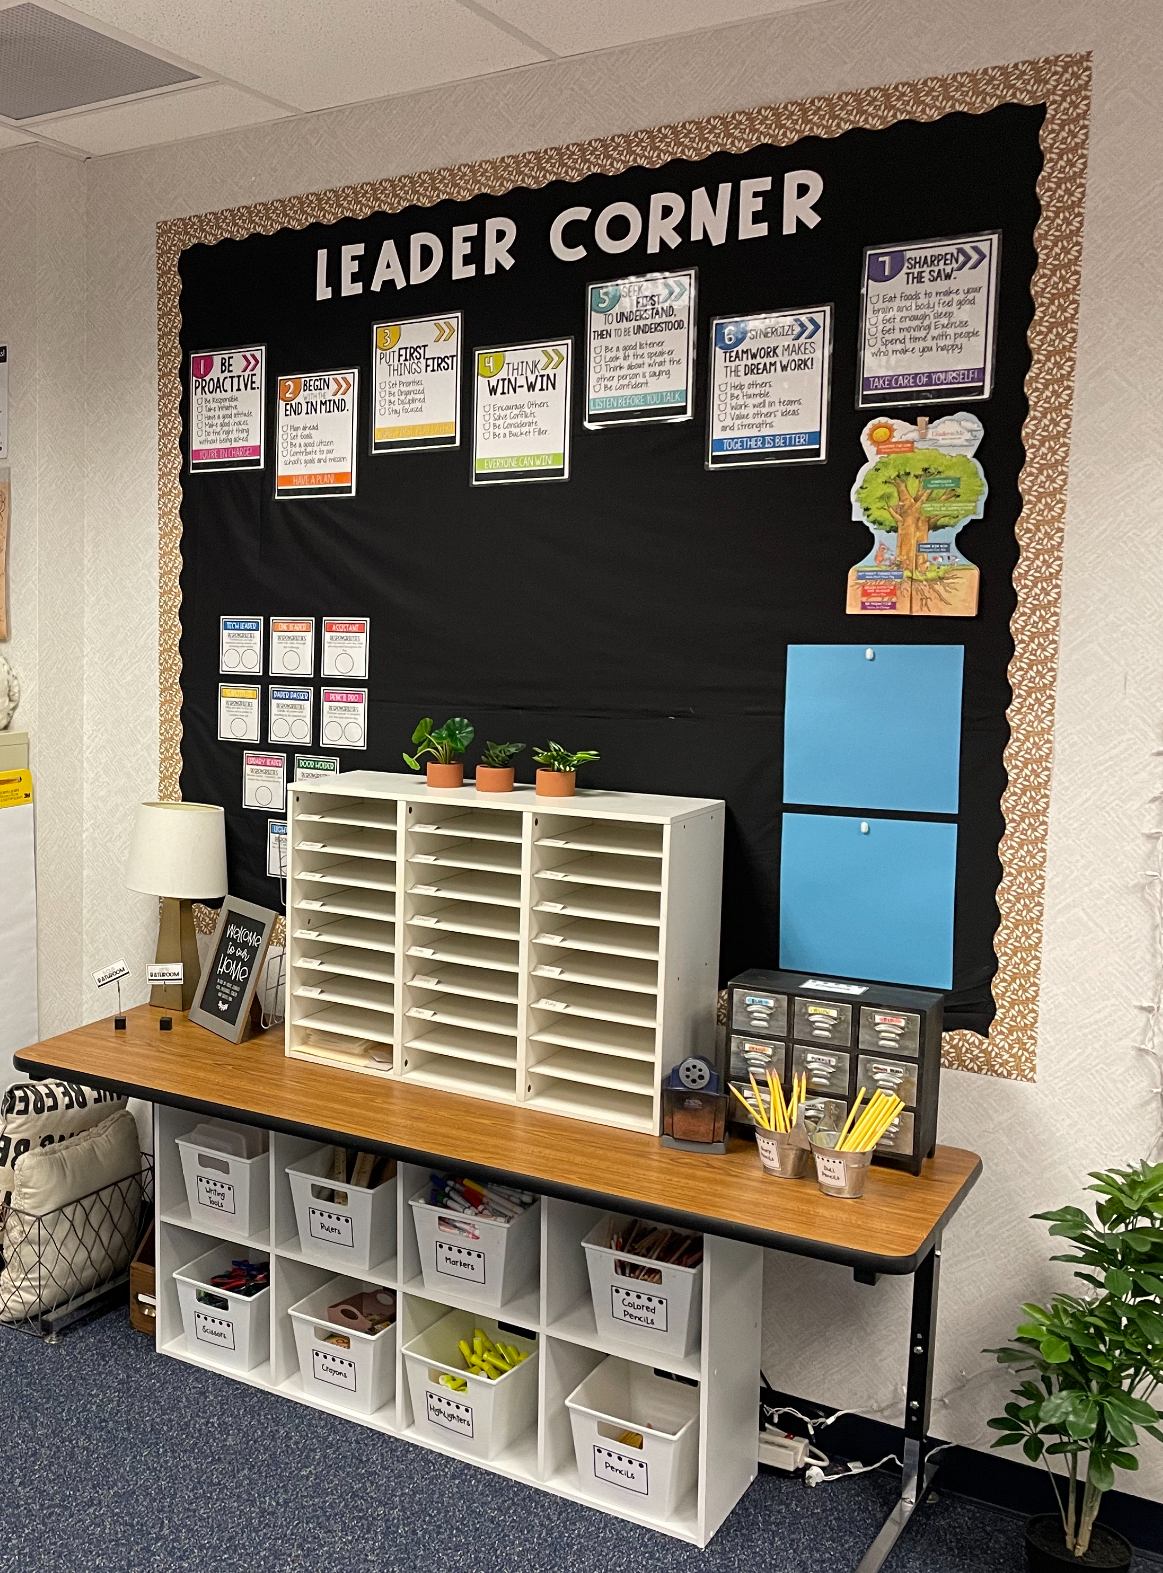 A bulletin board says Leader Corner at the top and has various papers on what makes a leader underneath.